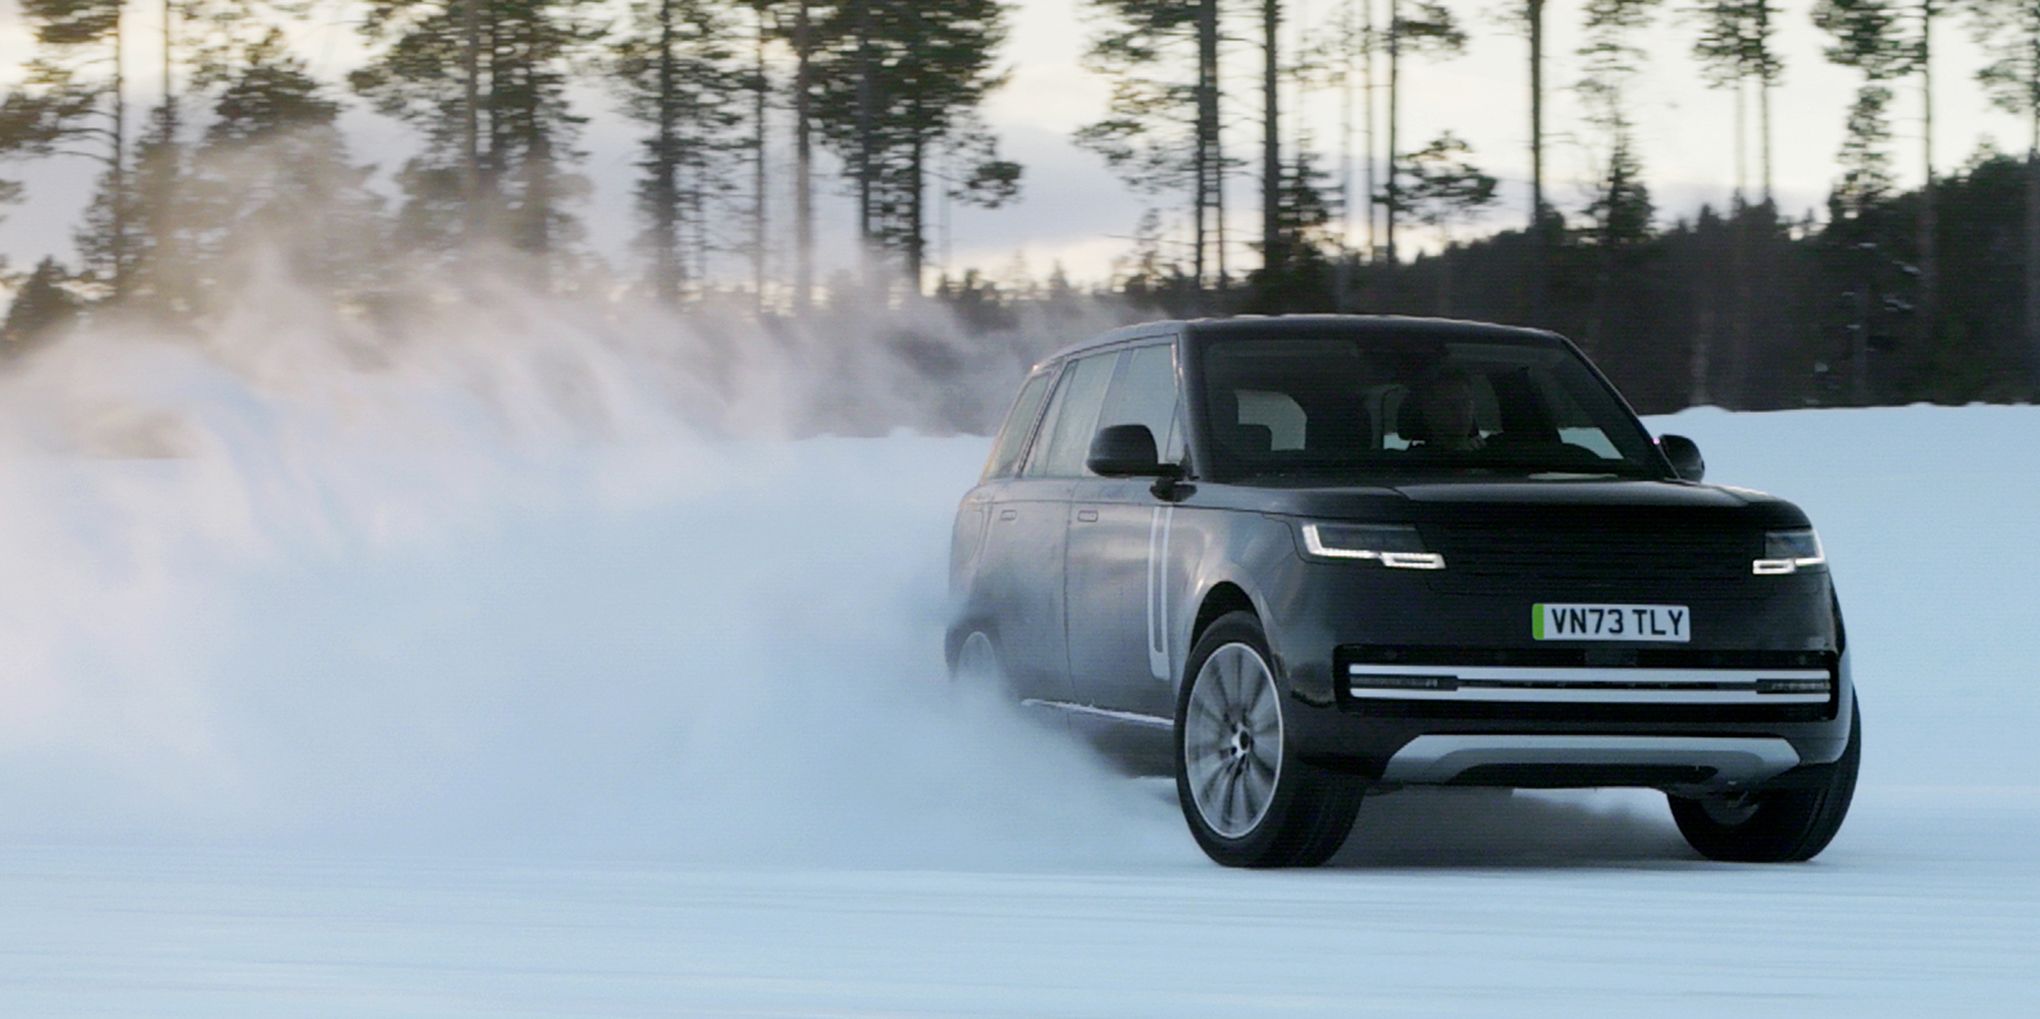 The New Range Rover Electric Slides on Ice